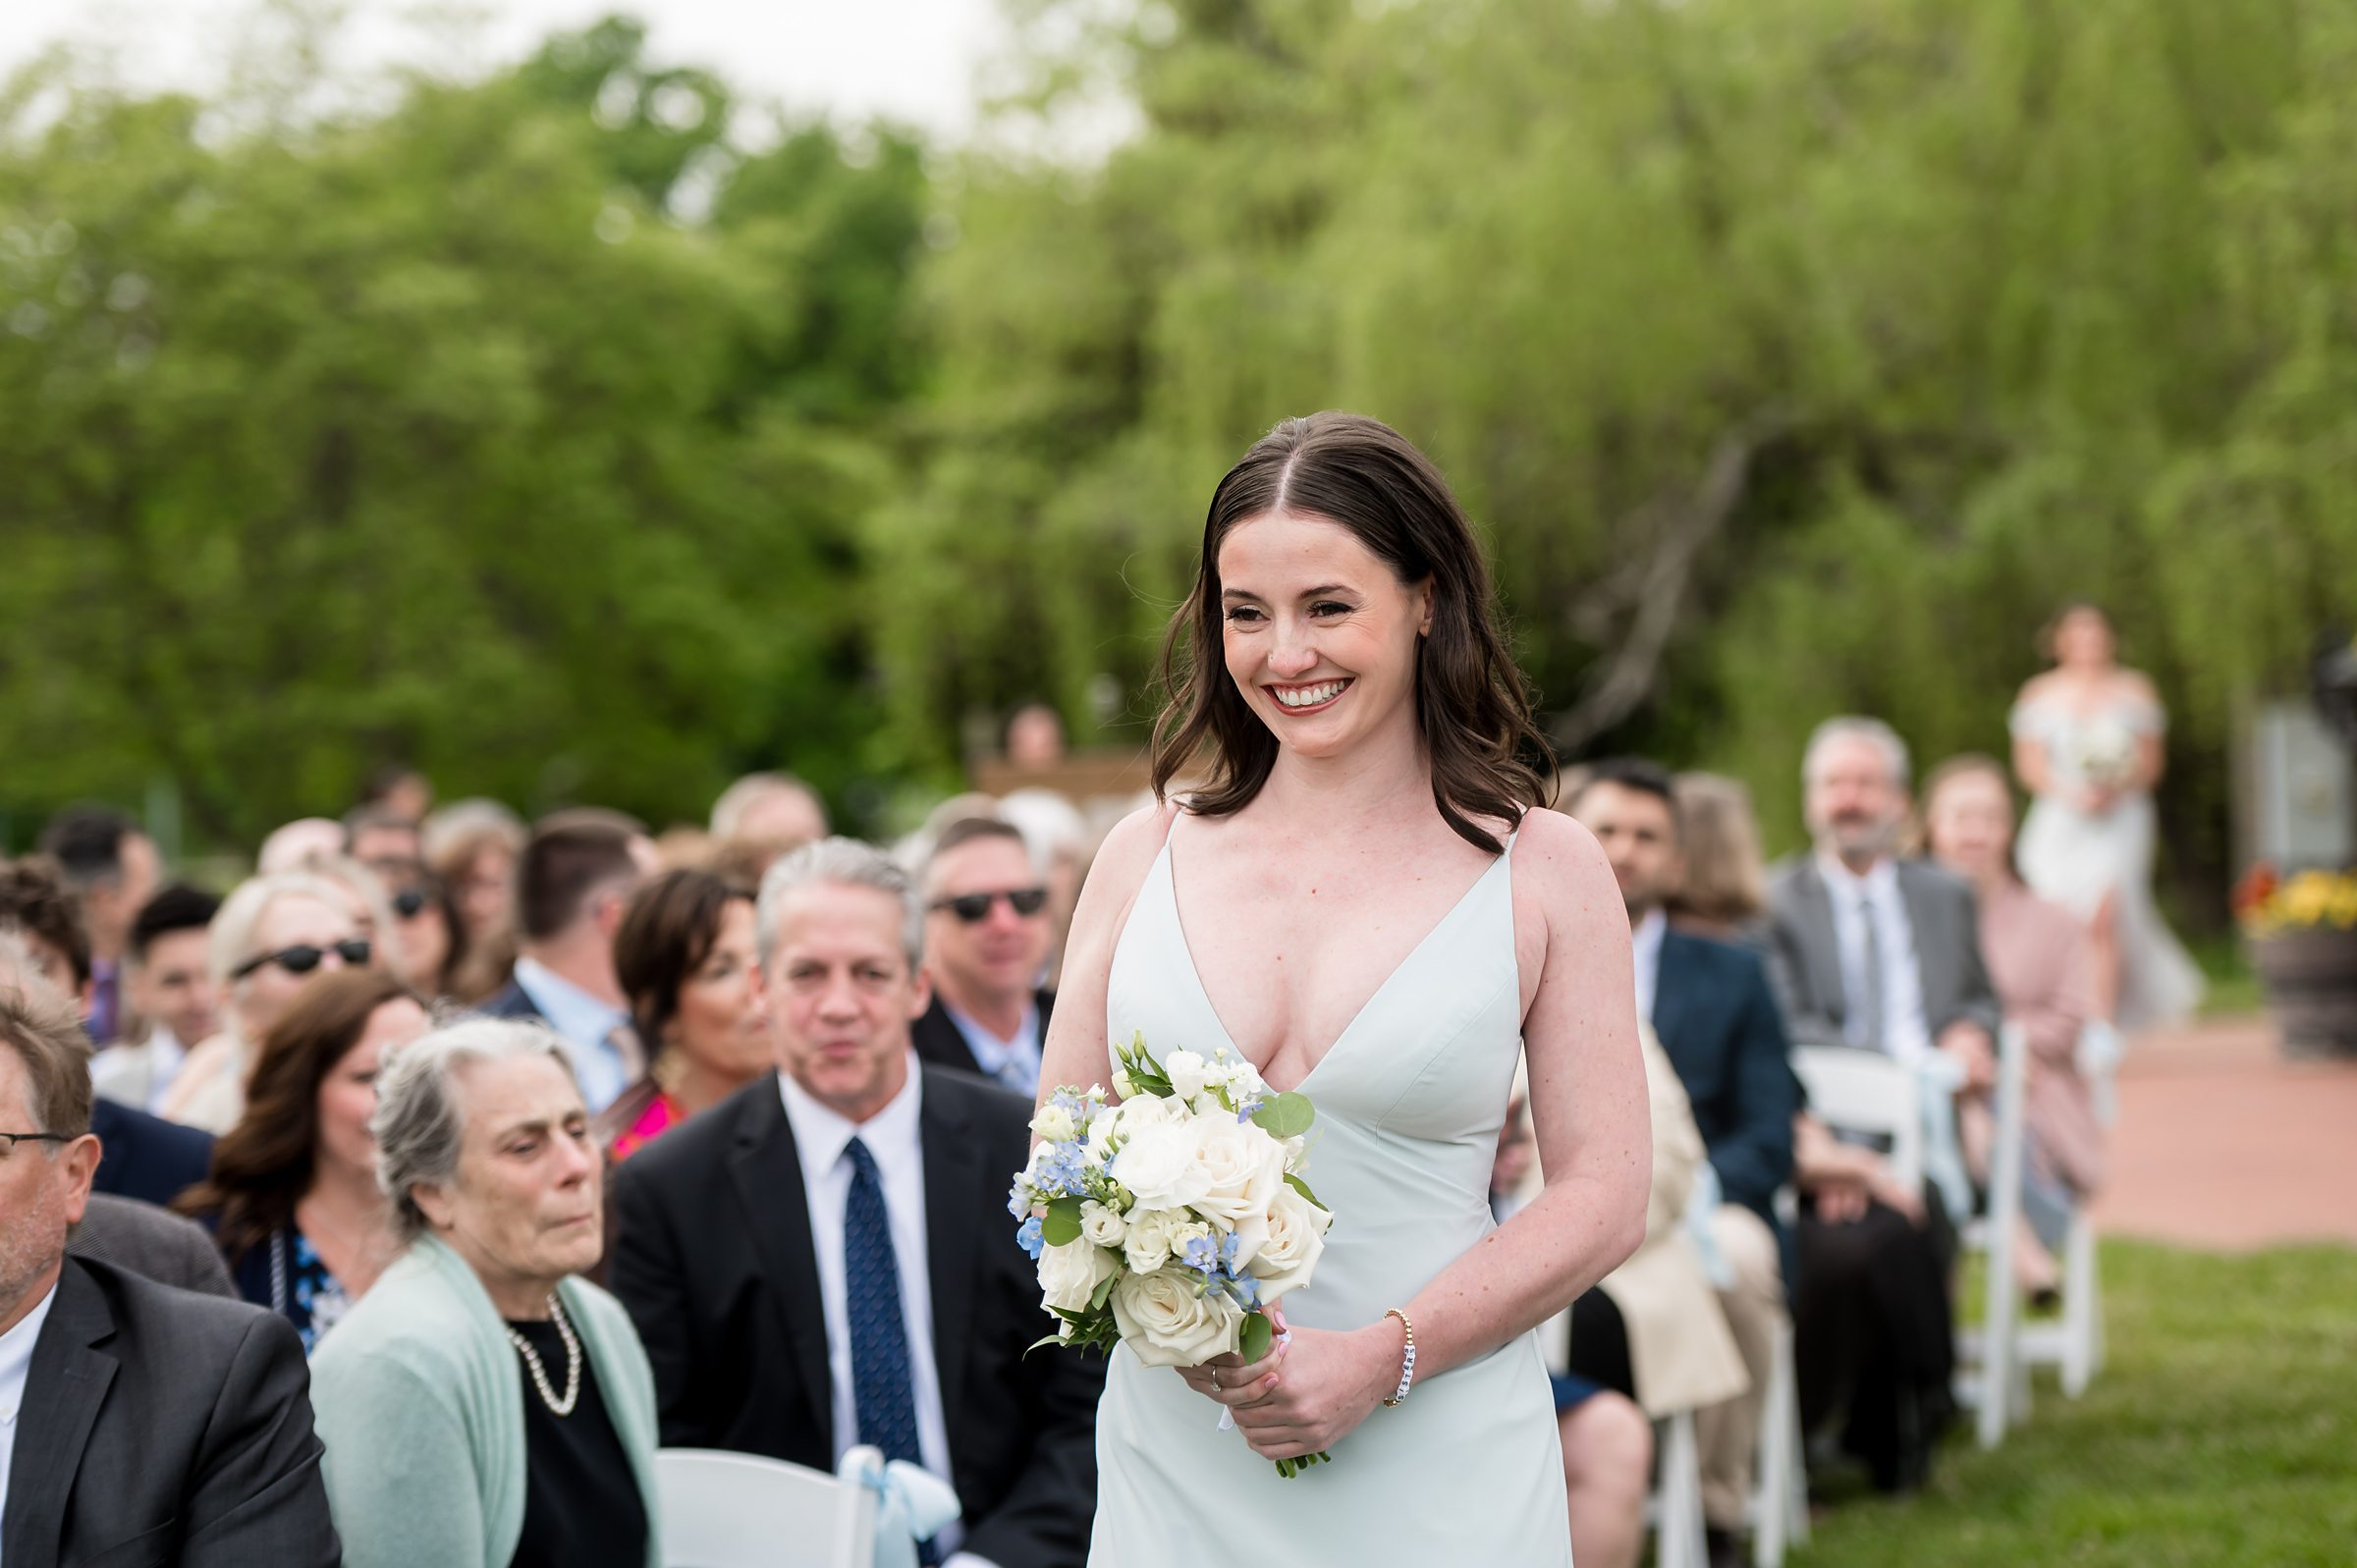 A woman in a light blue dress, holding a bouquet of flowers, walks down an outdoor aisle with seated guests on either side, during a daytime event. Trees are visible in the background.